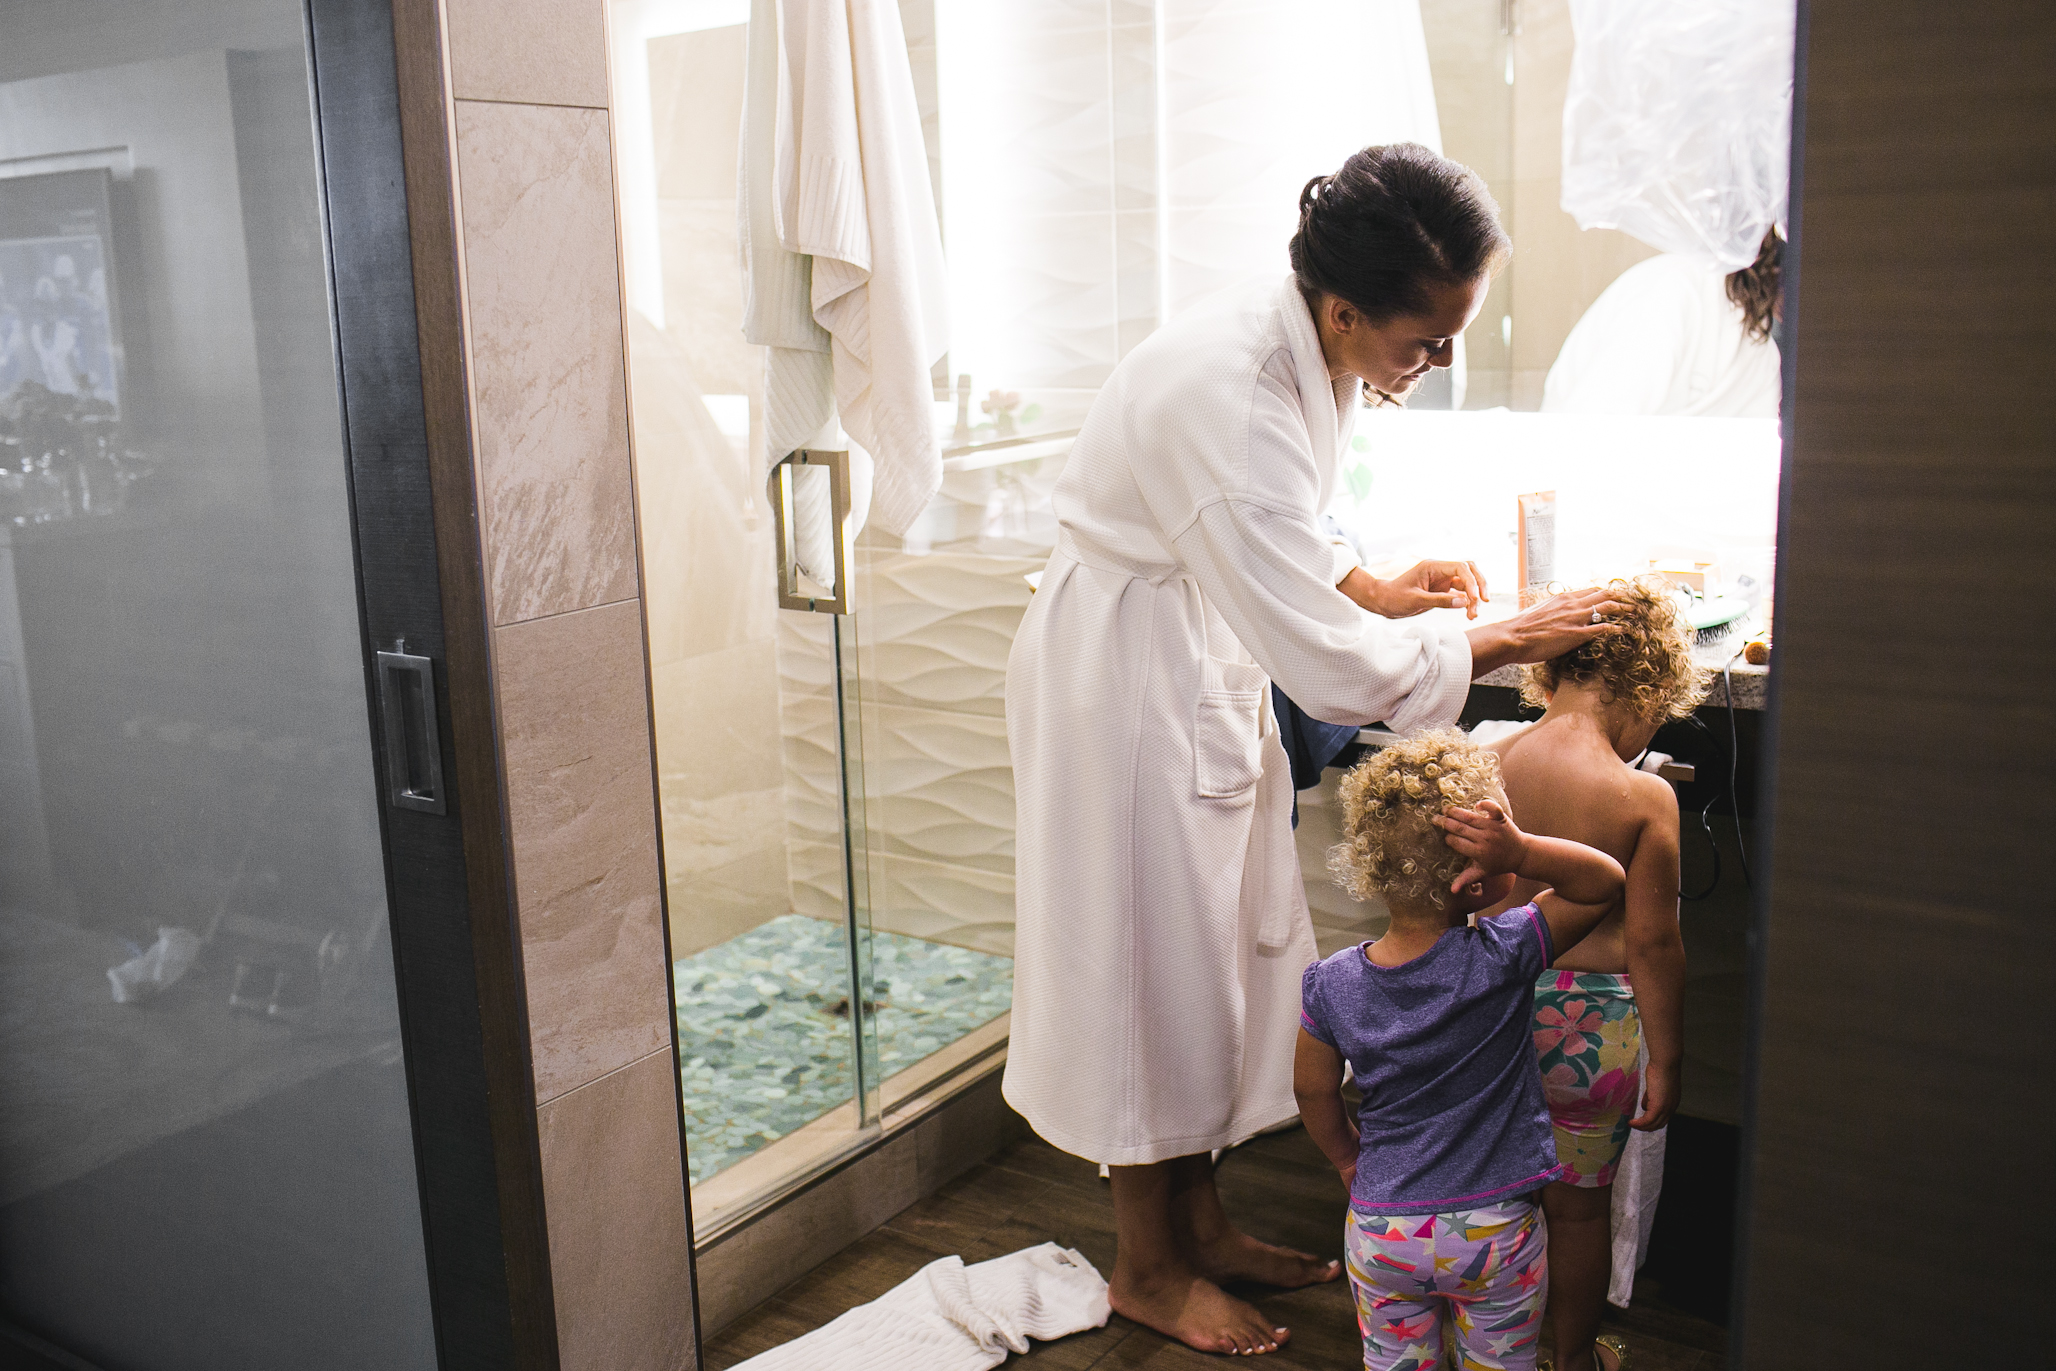 Jessica shared a very special bond with her nieces and helped them get ready for her big day.